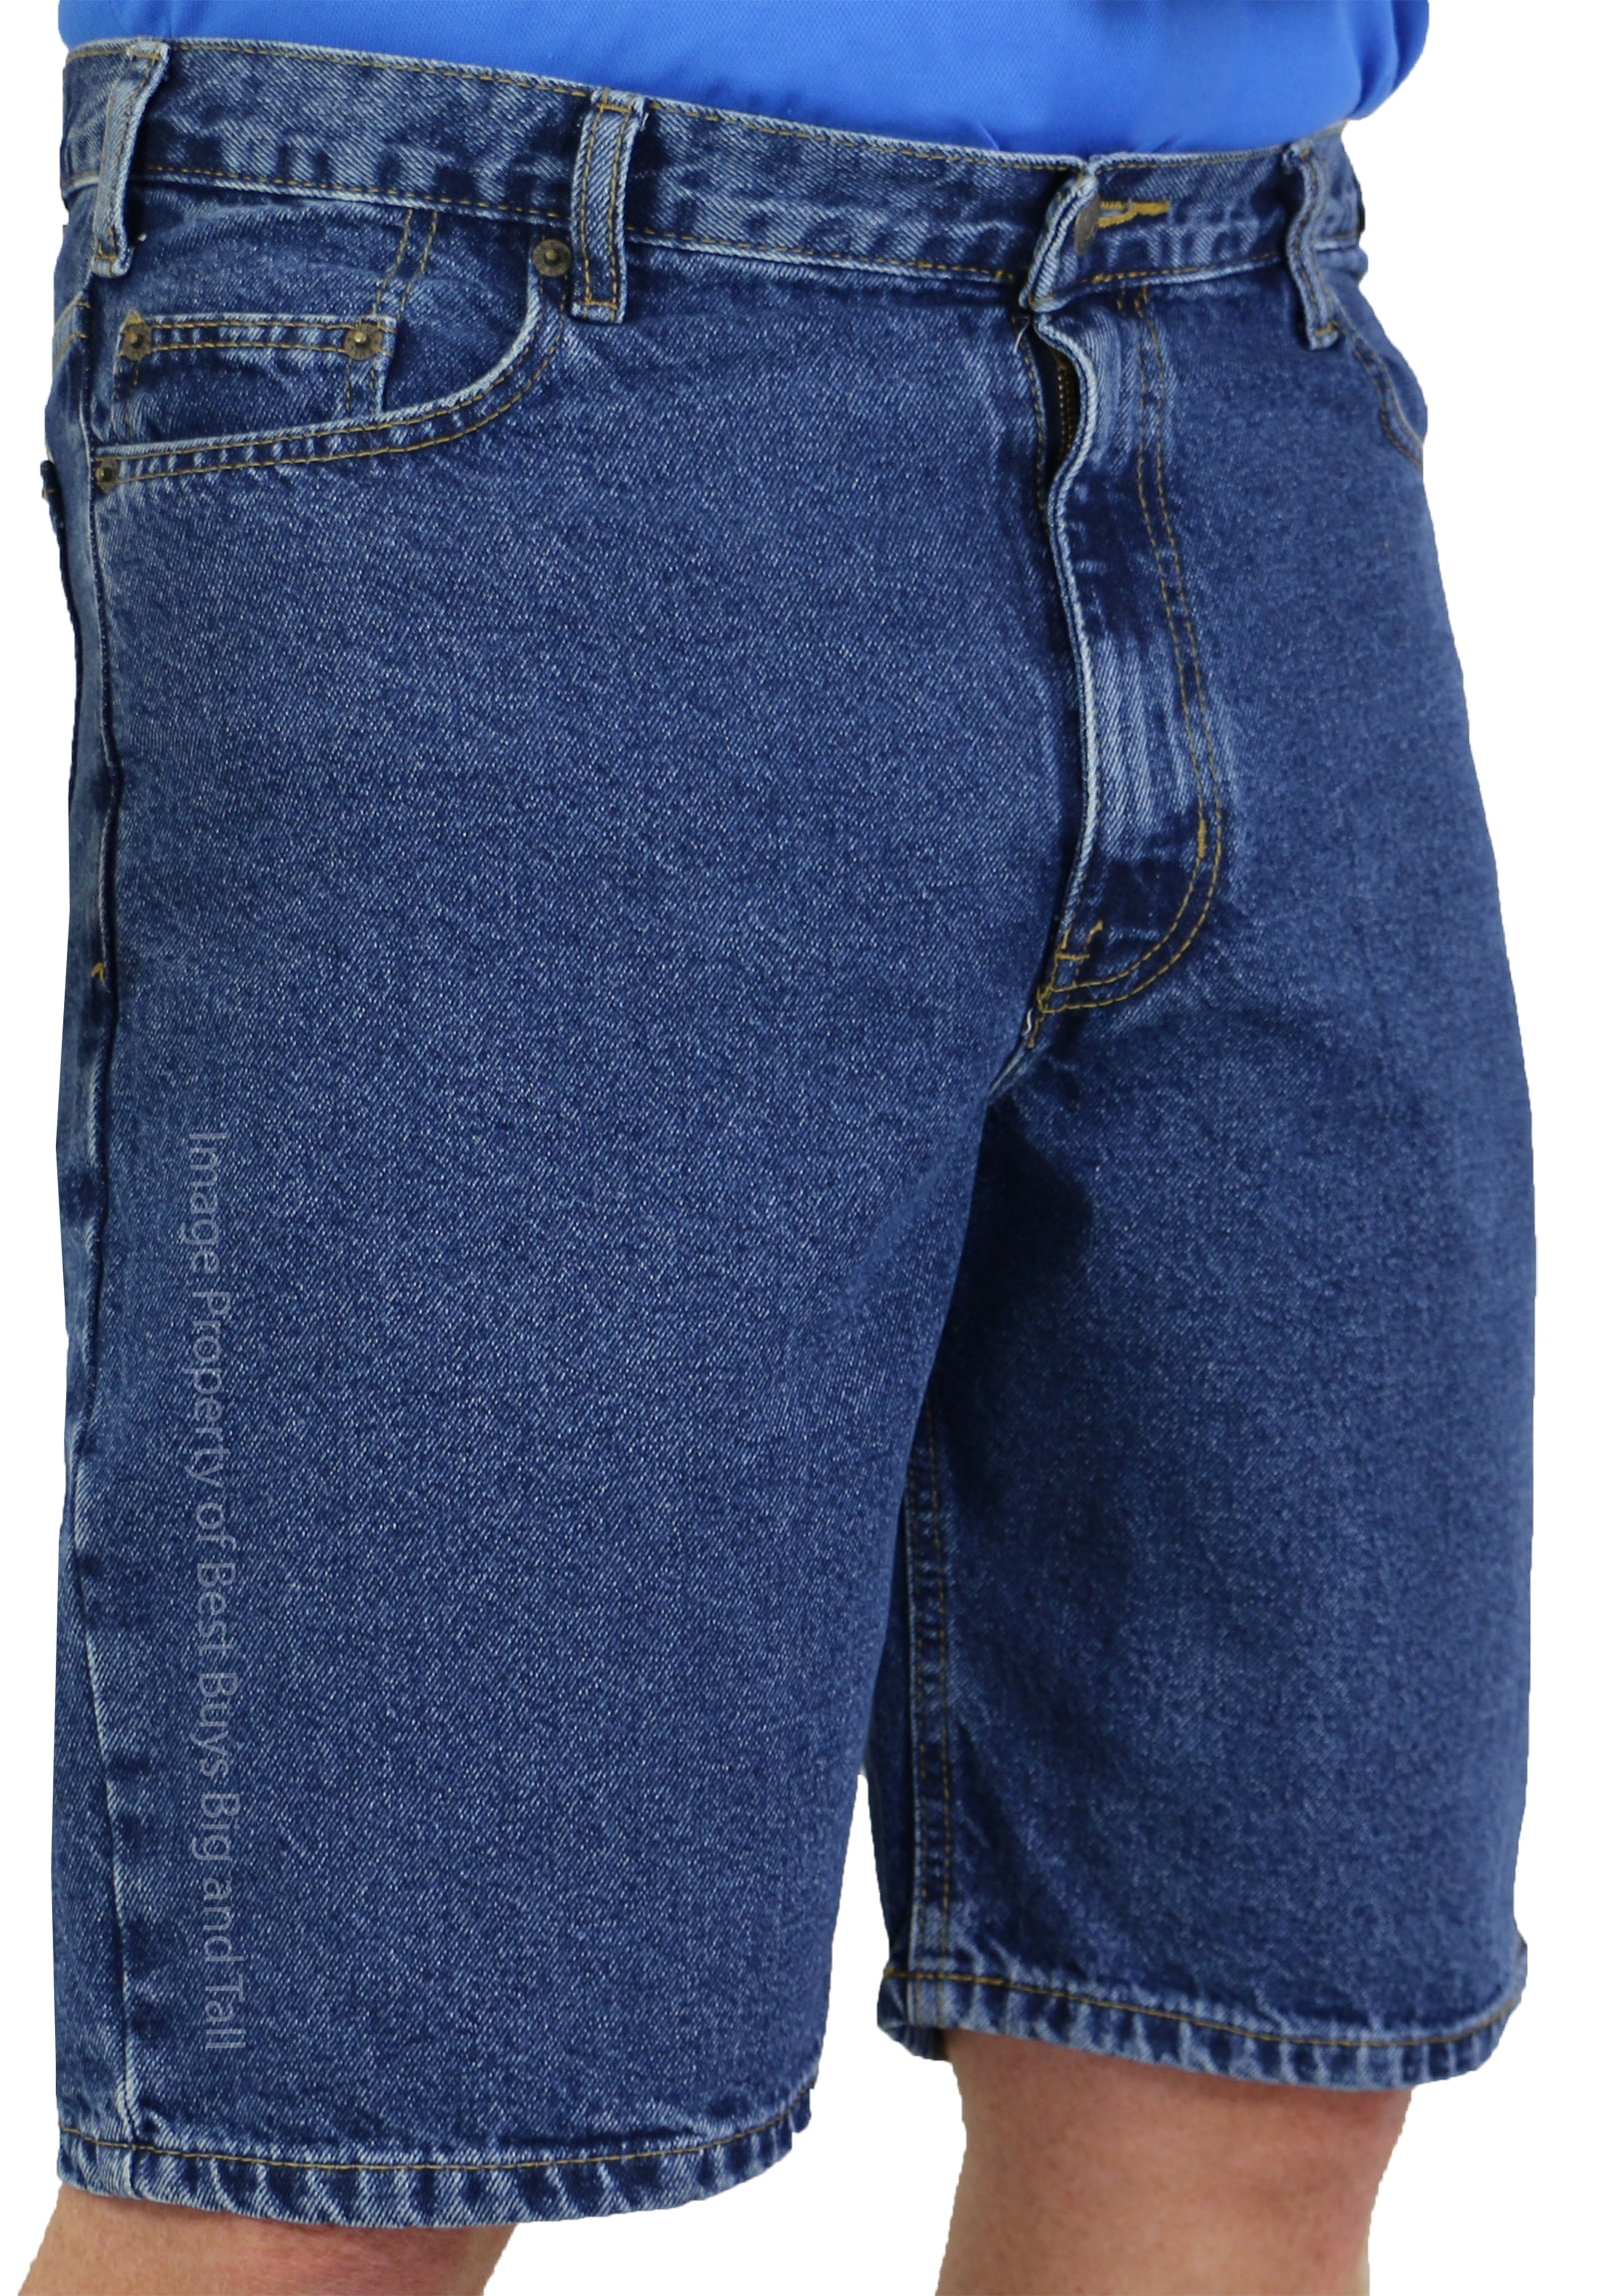 ROCXL Big & Tall Men’s Relaxed Fit Denim Shorts Sizes 42 to 66 ...